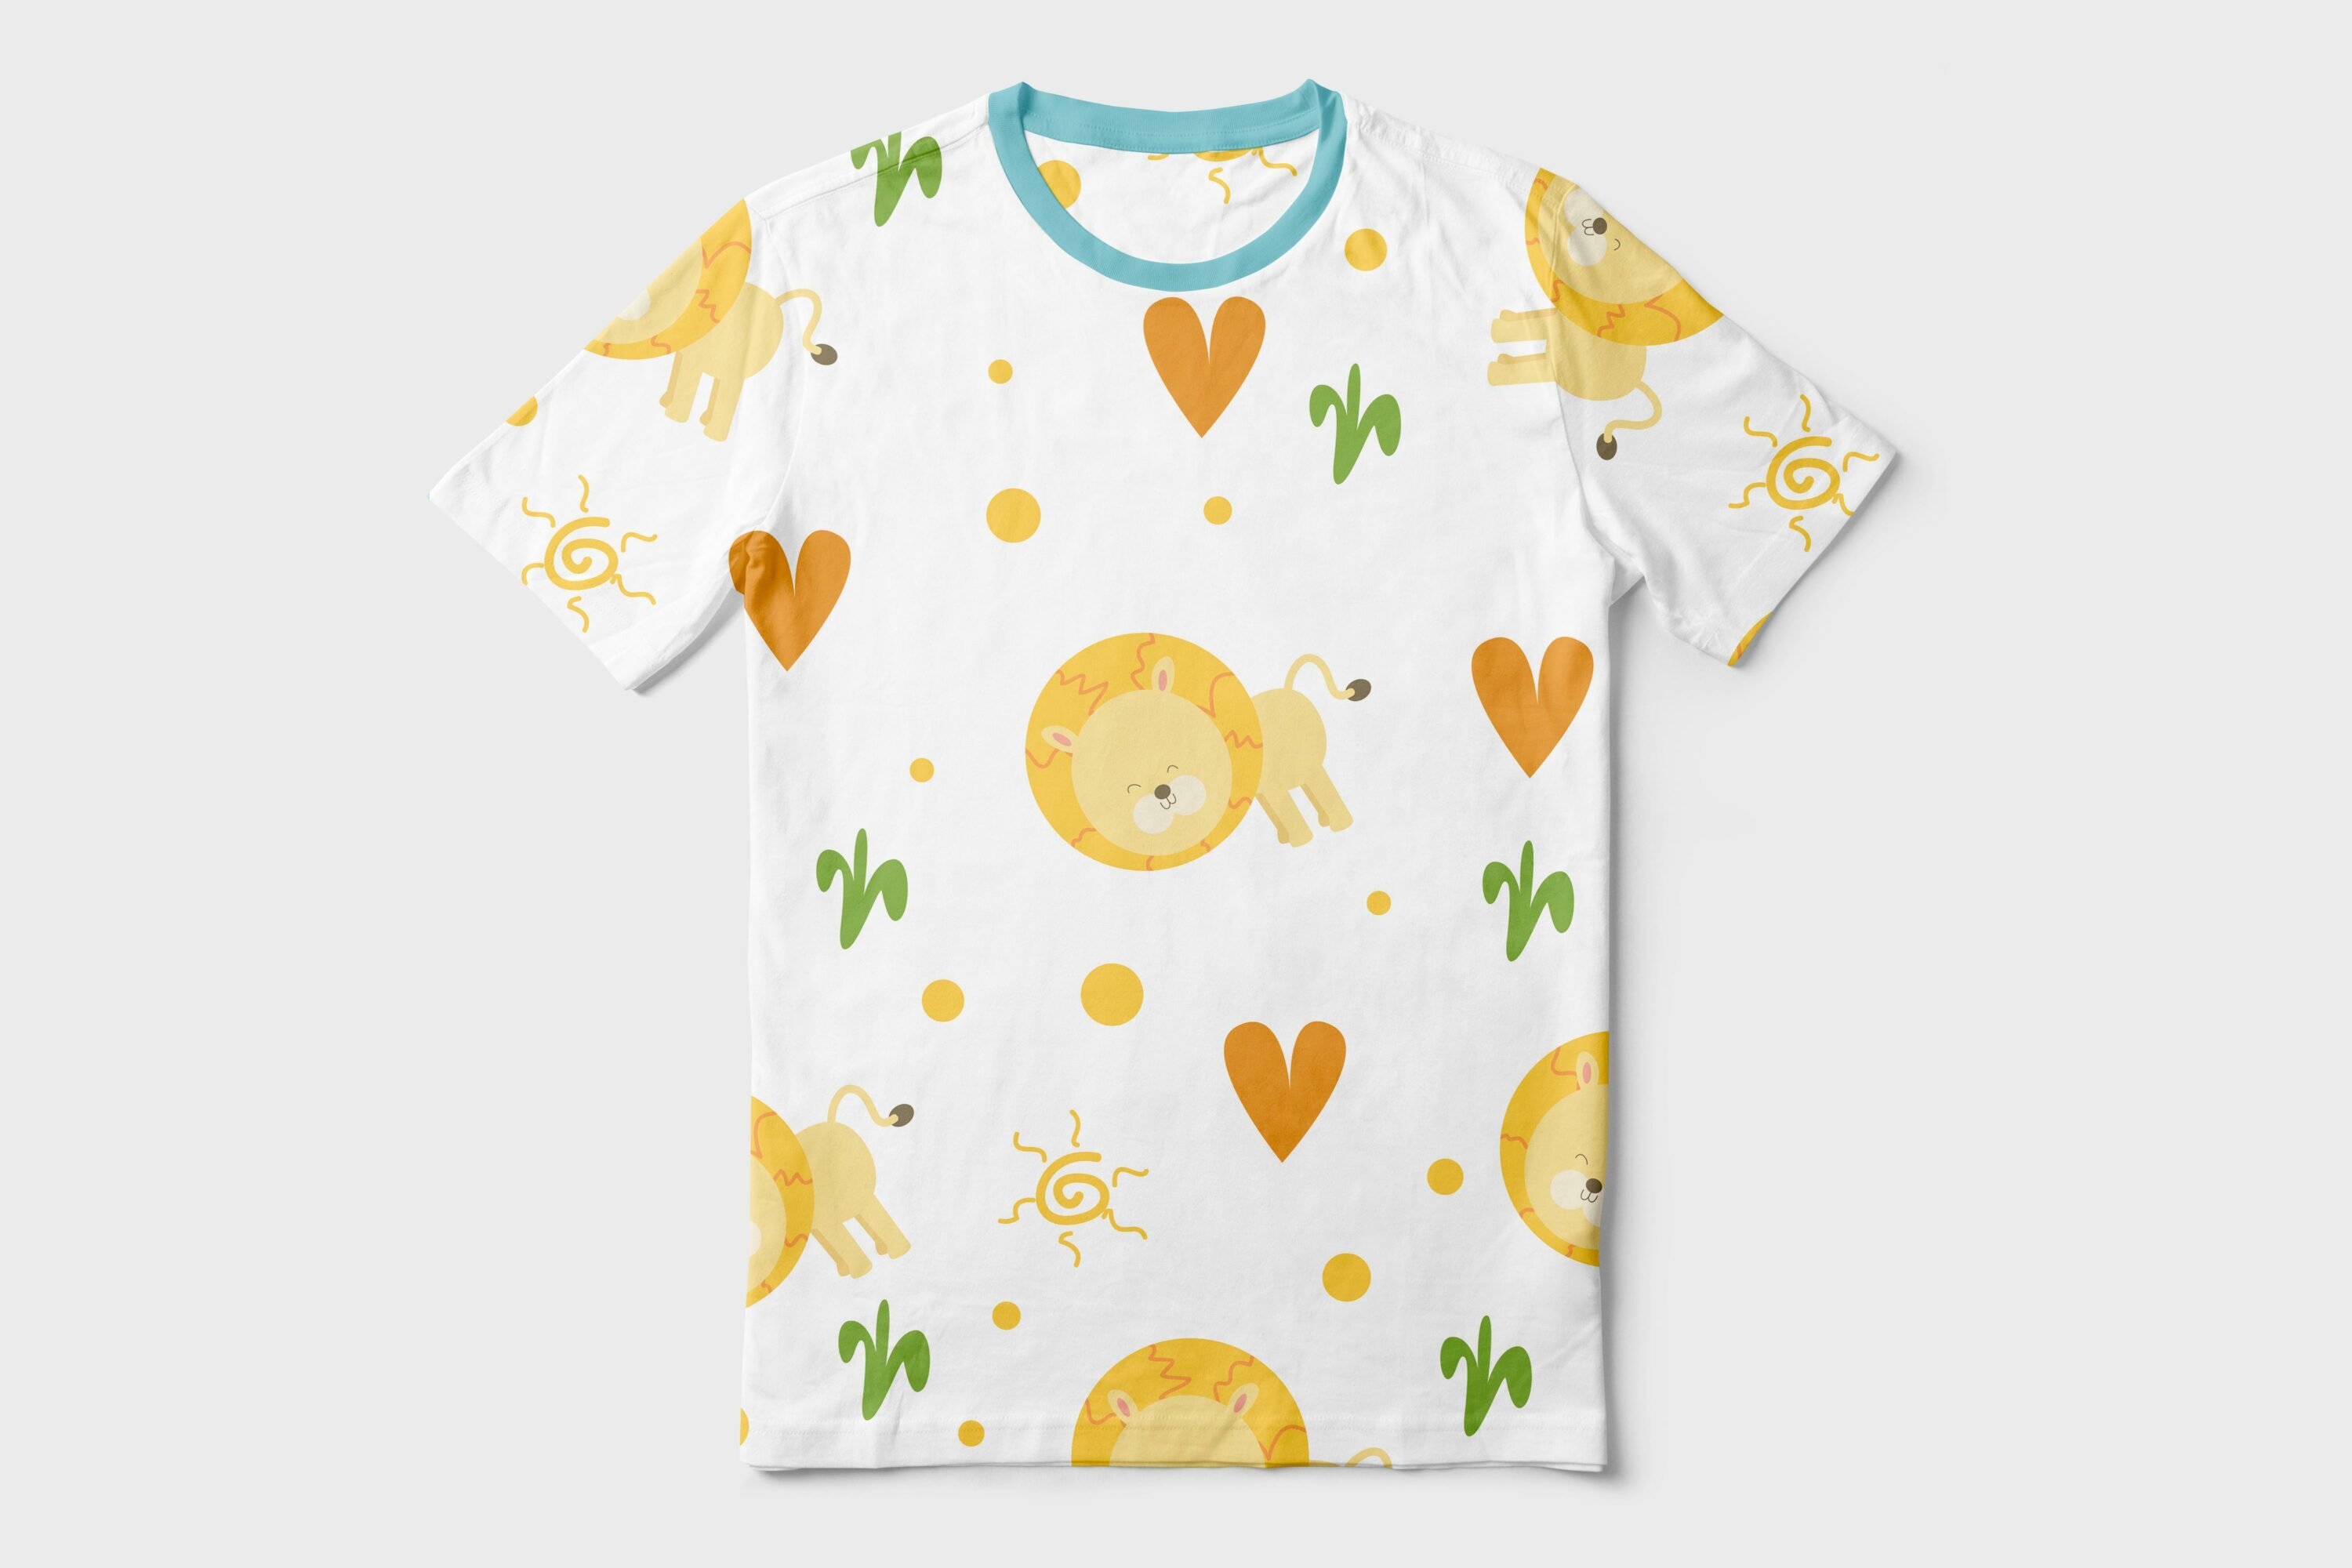 pumpkin, circle, flowers and animals suitable to use on t-shirt, pillow, gift box and etc.